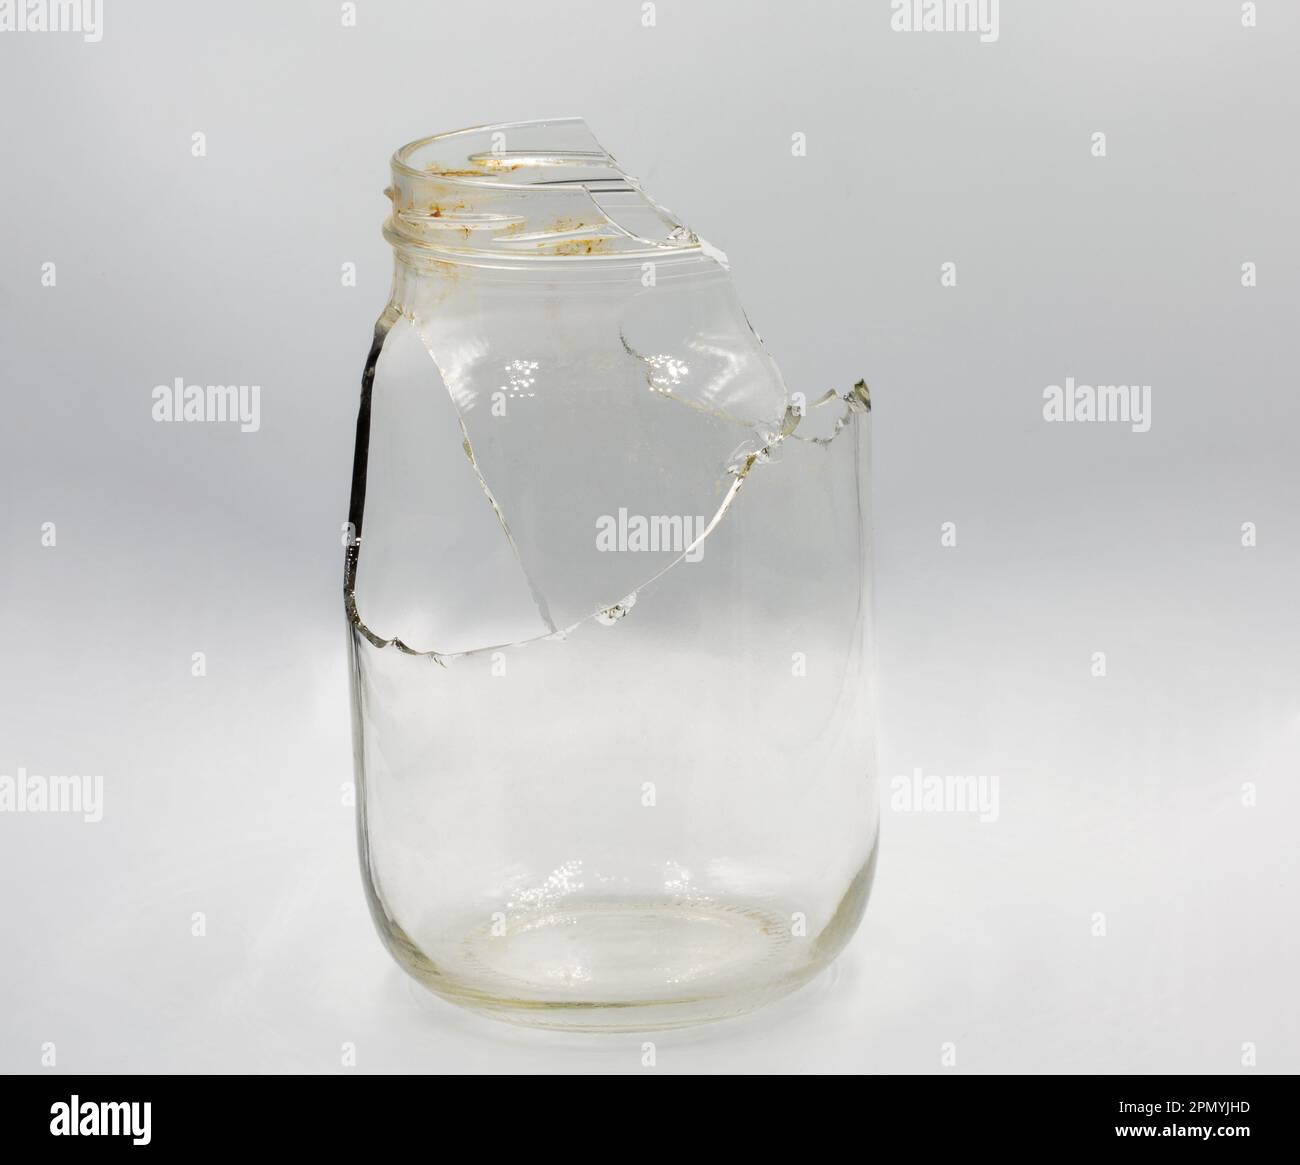 Glass bottle shattered by frozen water - Stock Image - A350/0253 - Science  Photo Library